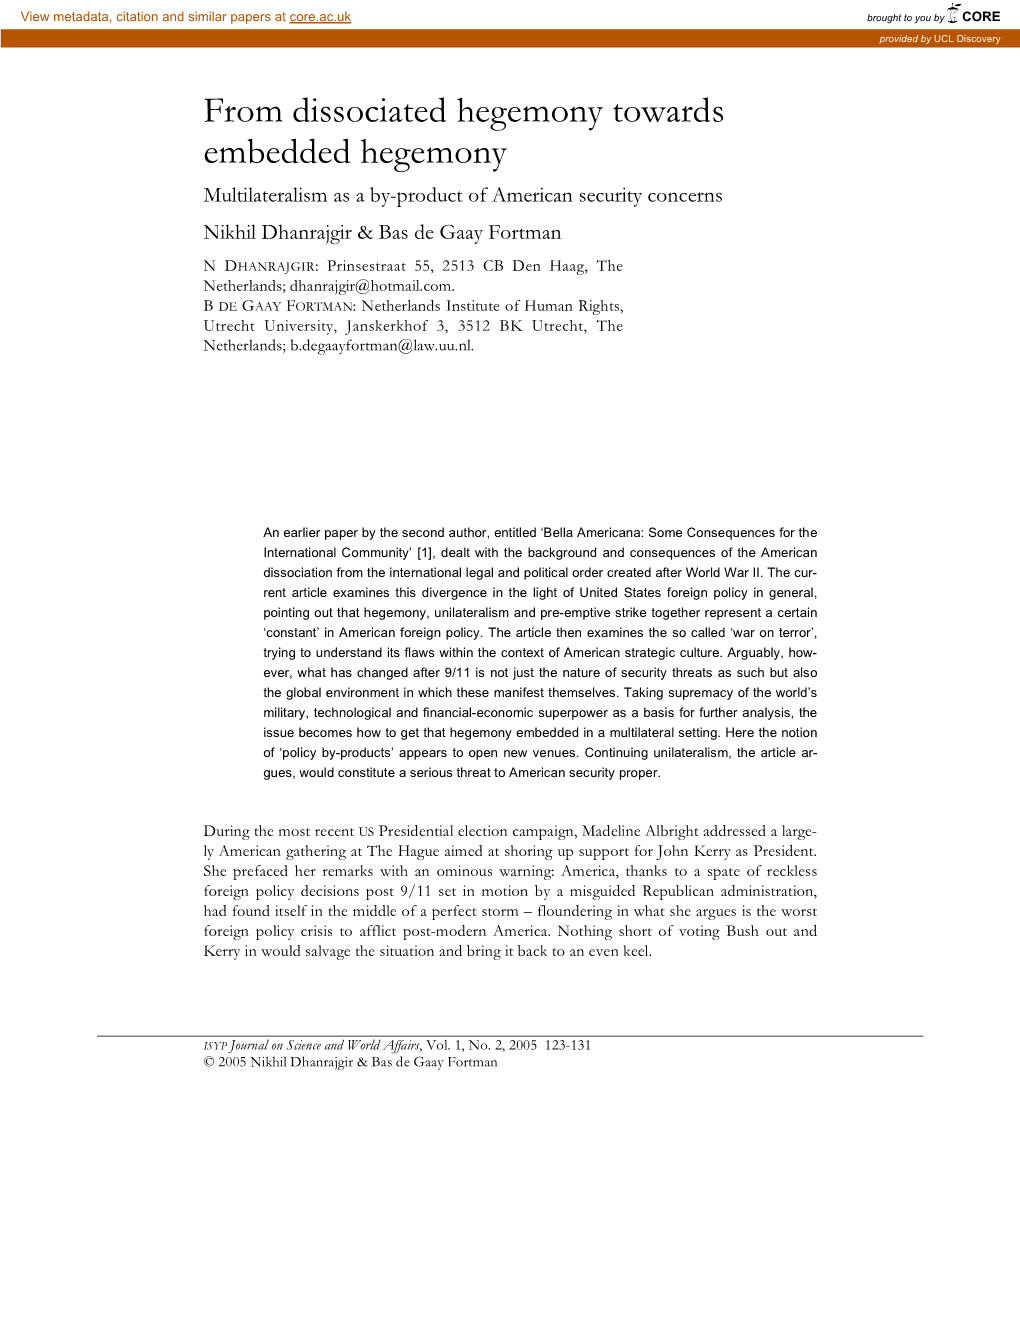 From Dissociated Hegemony Towards Embedded Hegemony Multilateralism As a By-Product of American Security Concerns Nikhil Dhanrajgir & Bas De Gaay Fortman